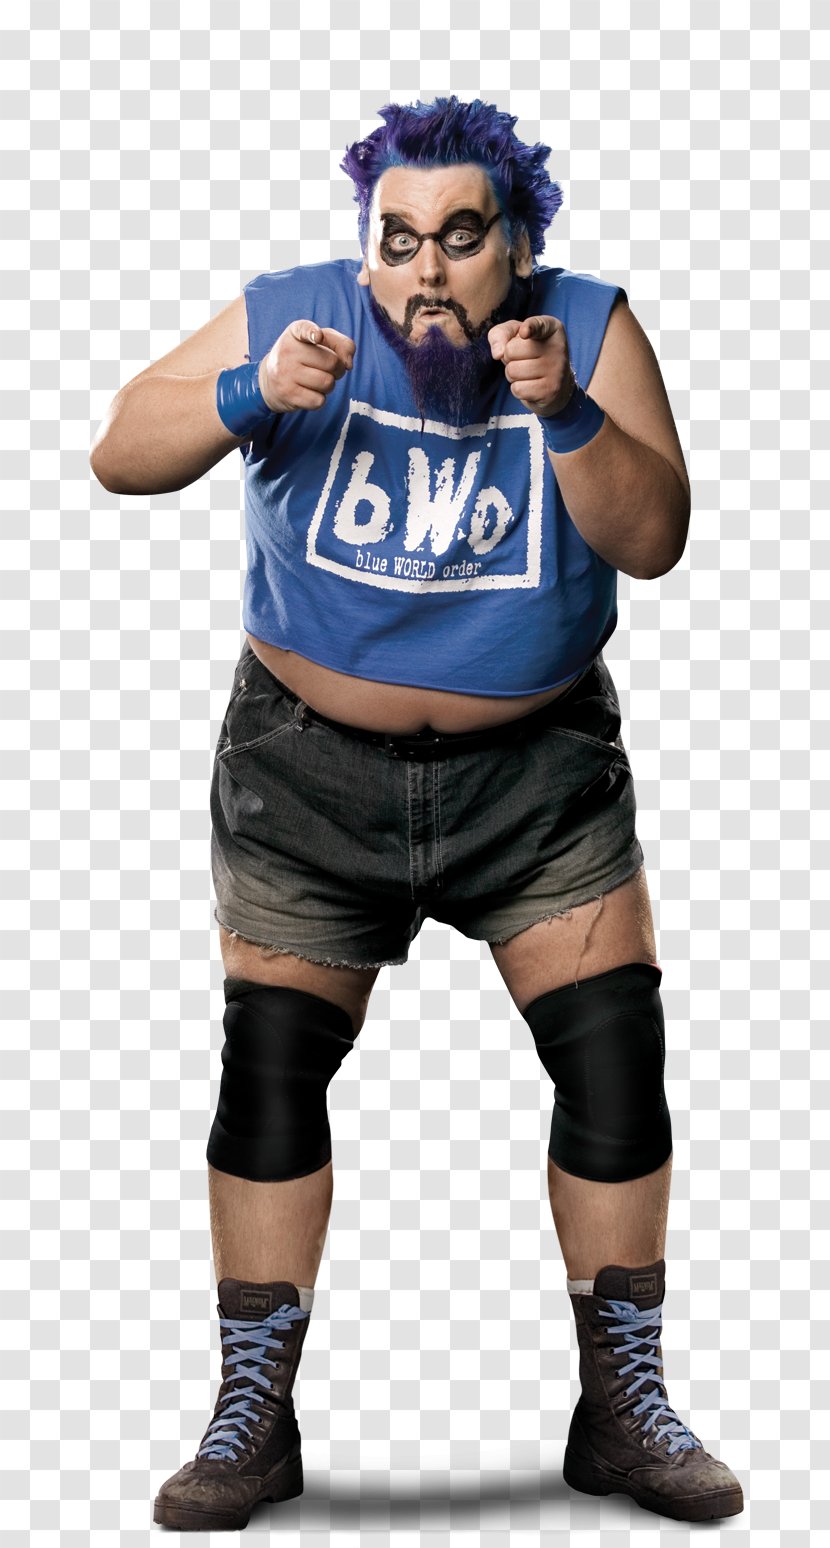 The Blue Meanie Royal Rumble (1999) Professional Wrestler SummerSlam (1998) - Heart - Sheamus Transparent PNG